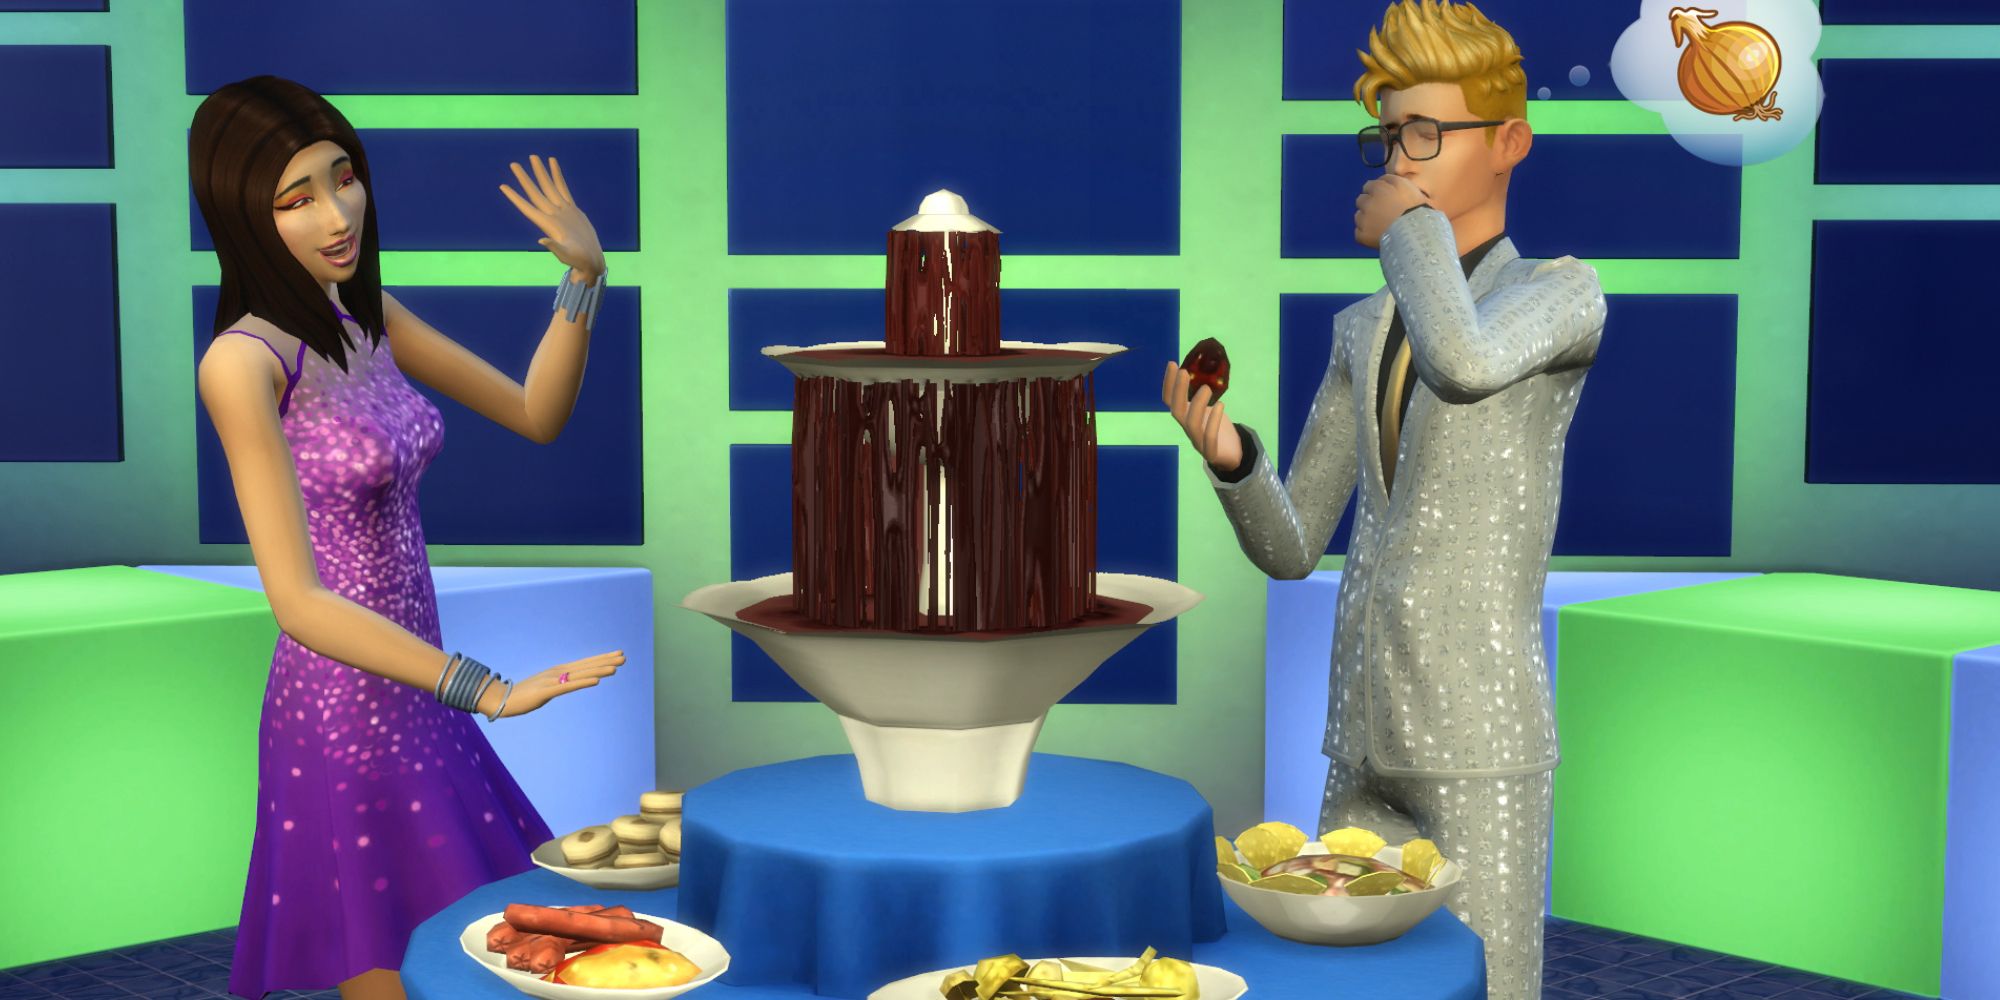 Sims 4 luxury party sims one holding a hand up as if to say no